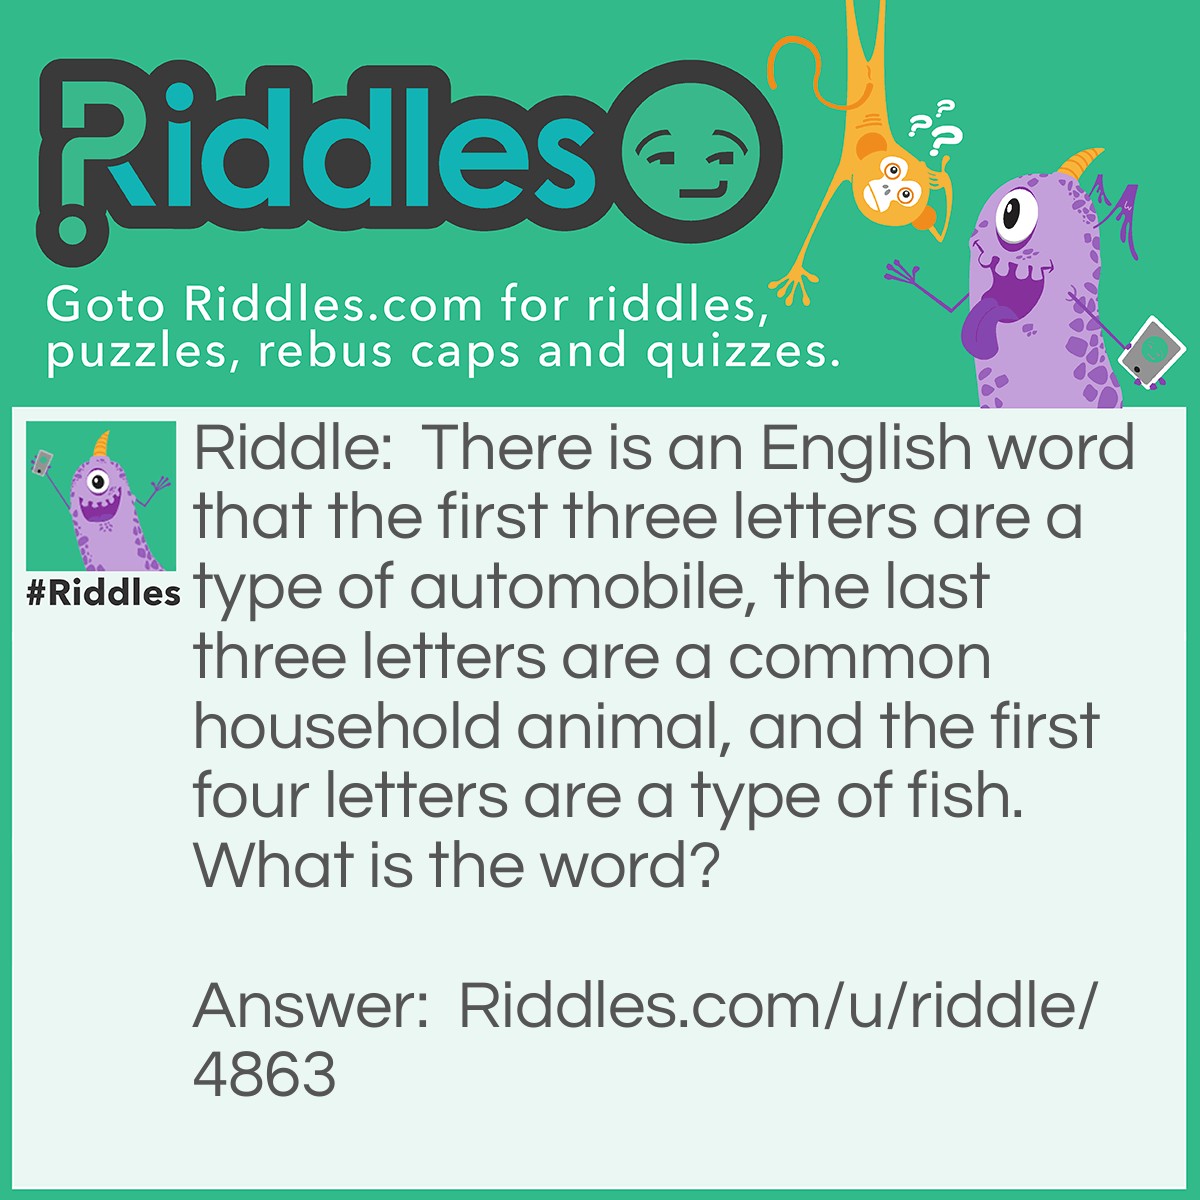 Riddle: There is an English word that the first three letters are a type of automobile, the last three letters are a common household animal, and the first four letters are a type of fish. What is the word? Answer: Carpet